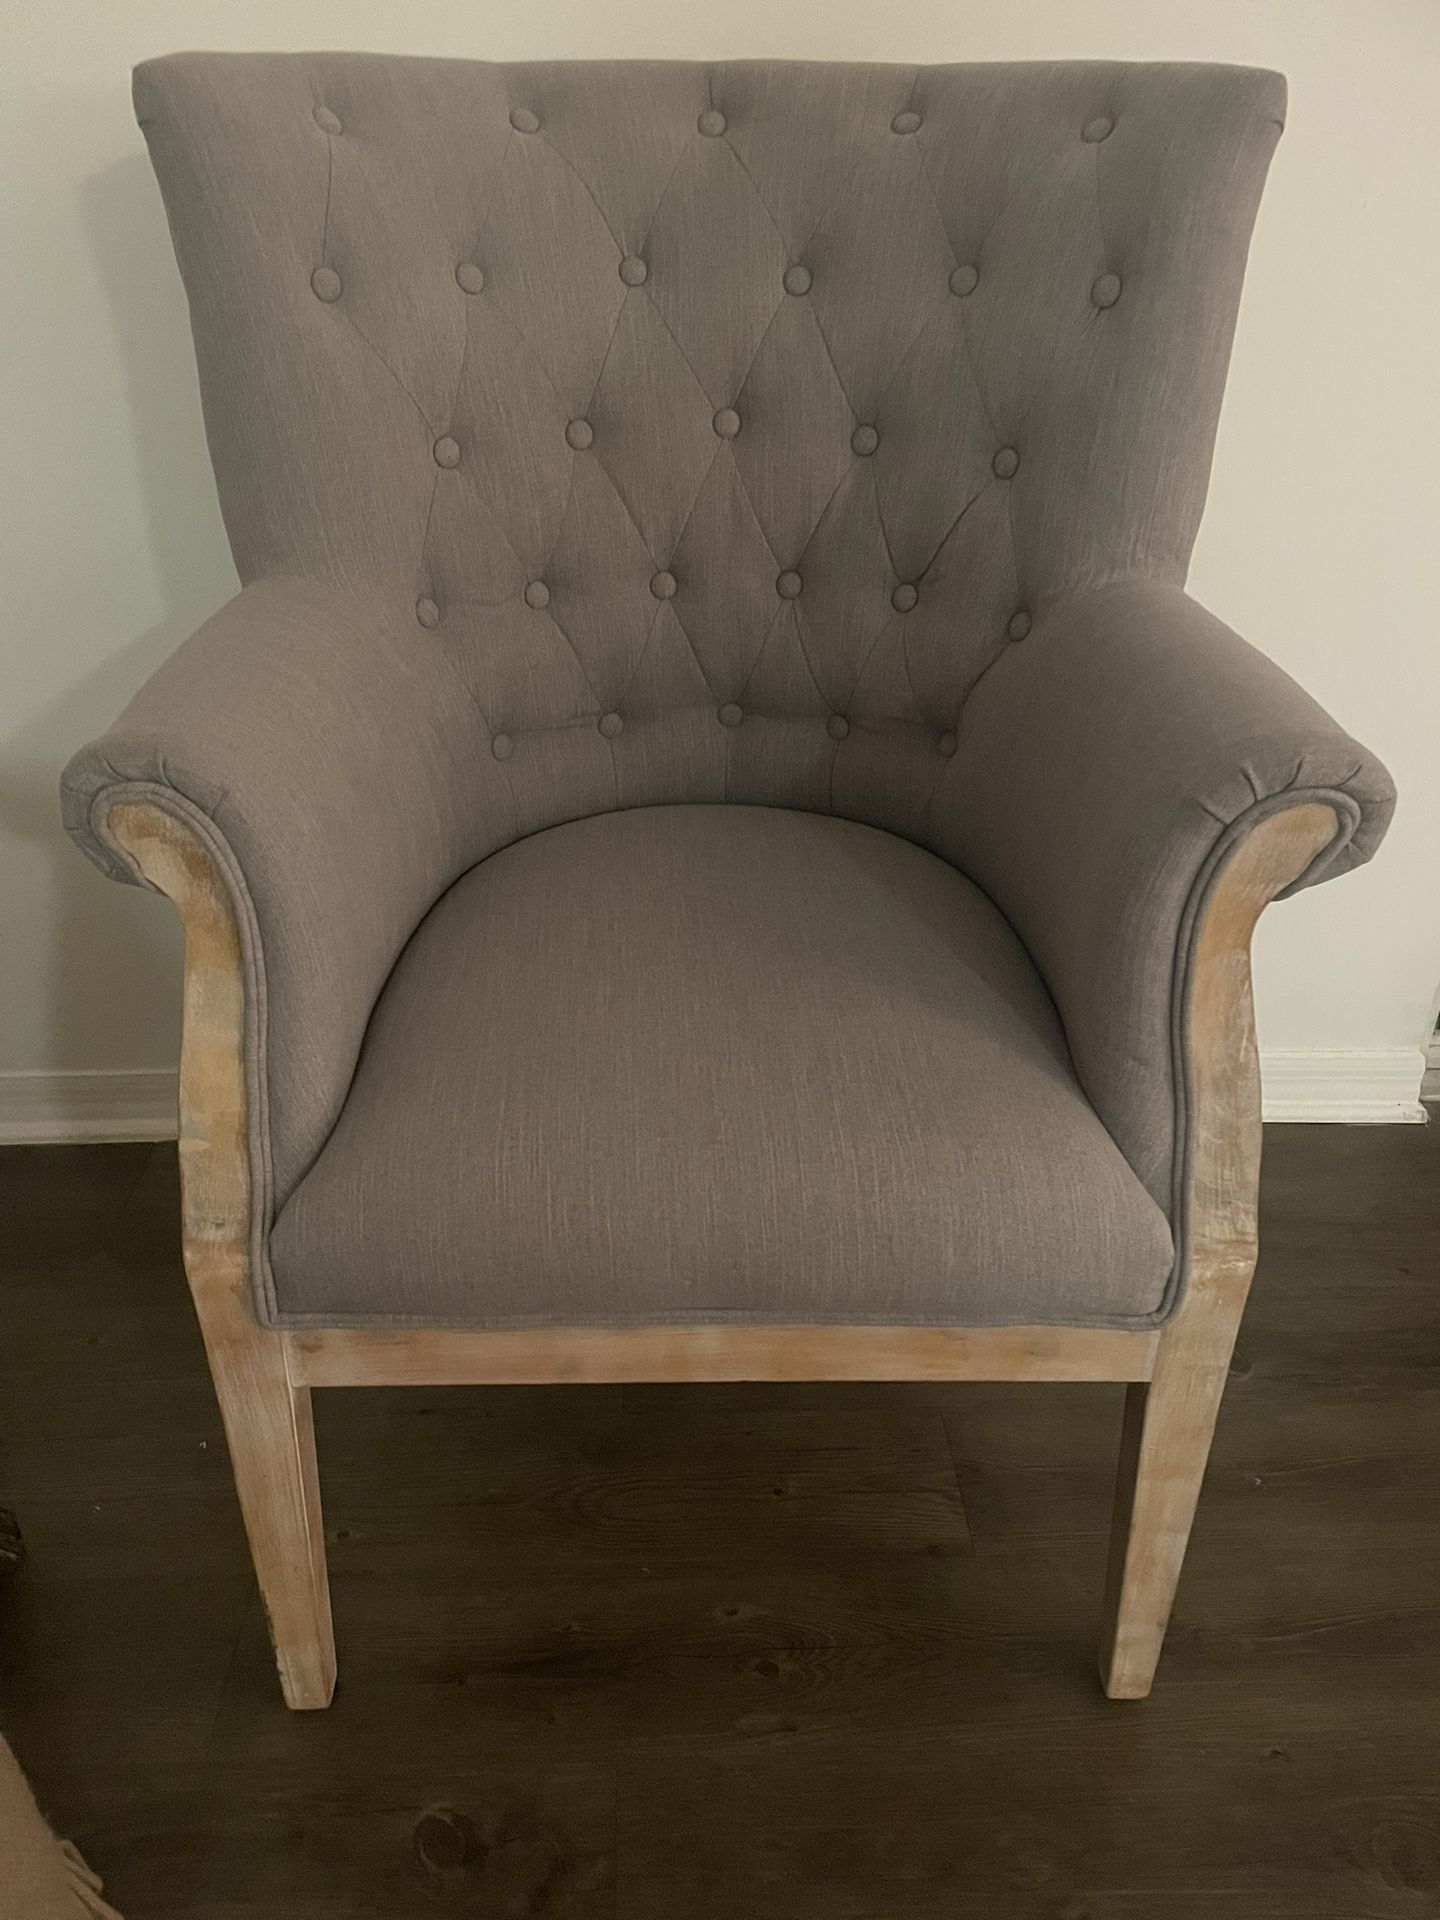 Beautiful Chair Light Grey , 4 Months Old. Paid $700 